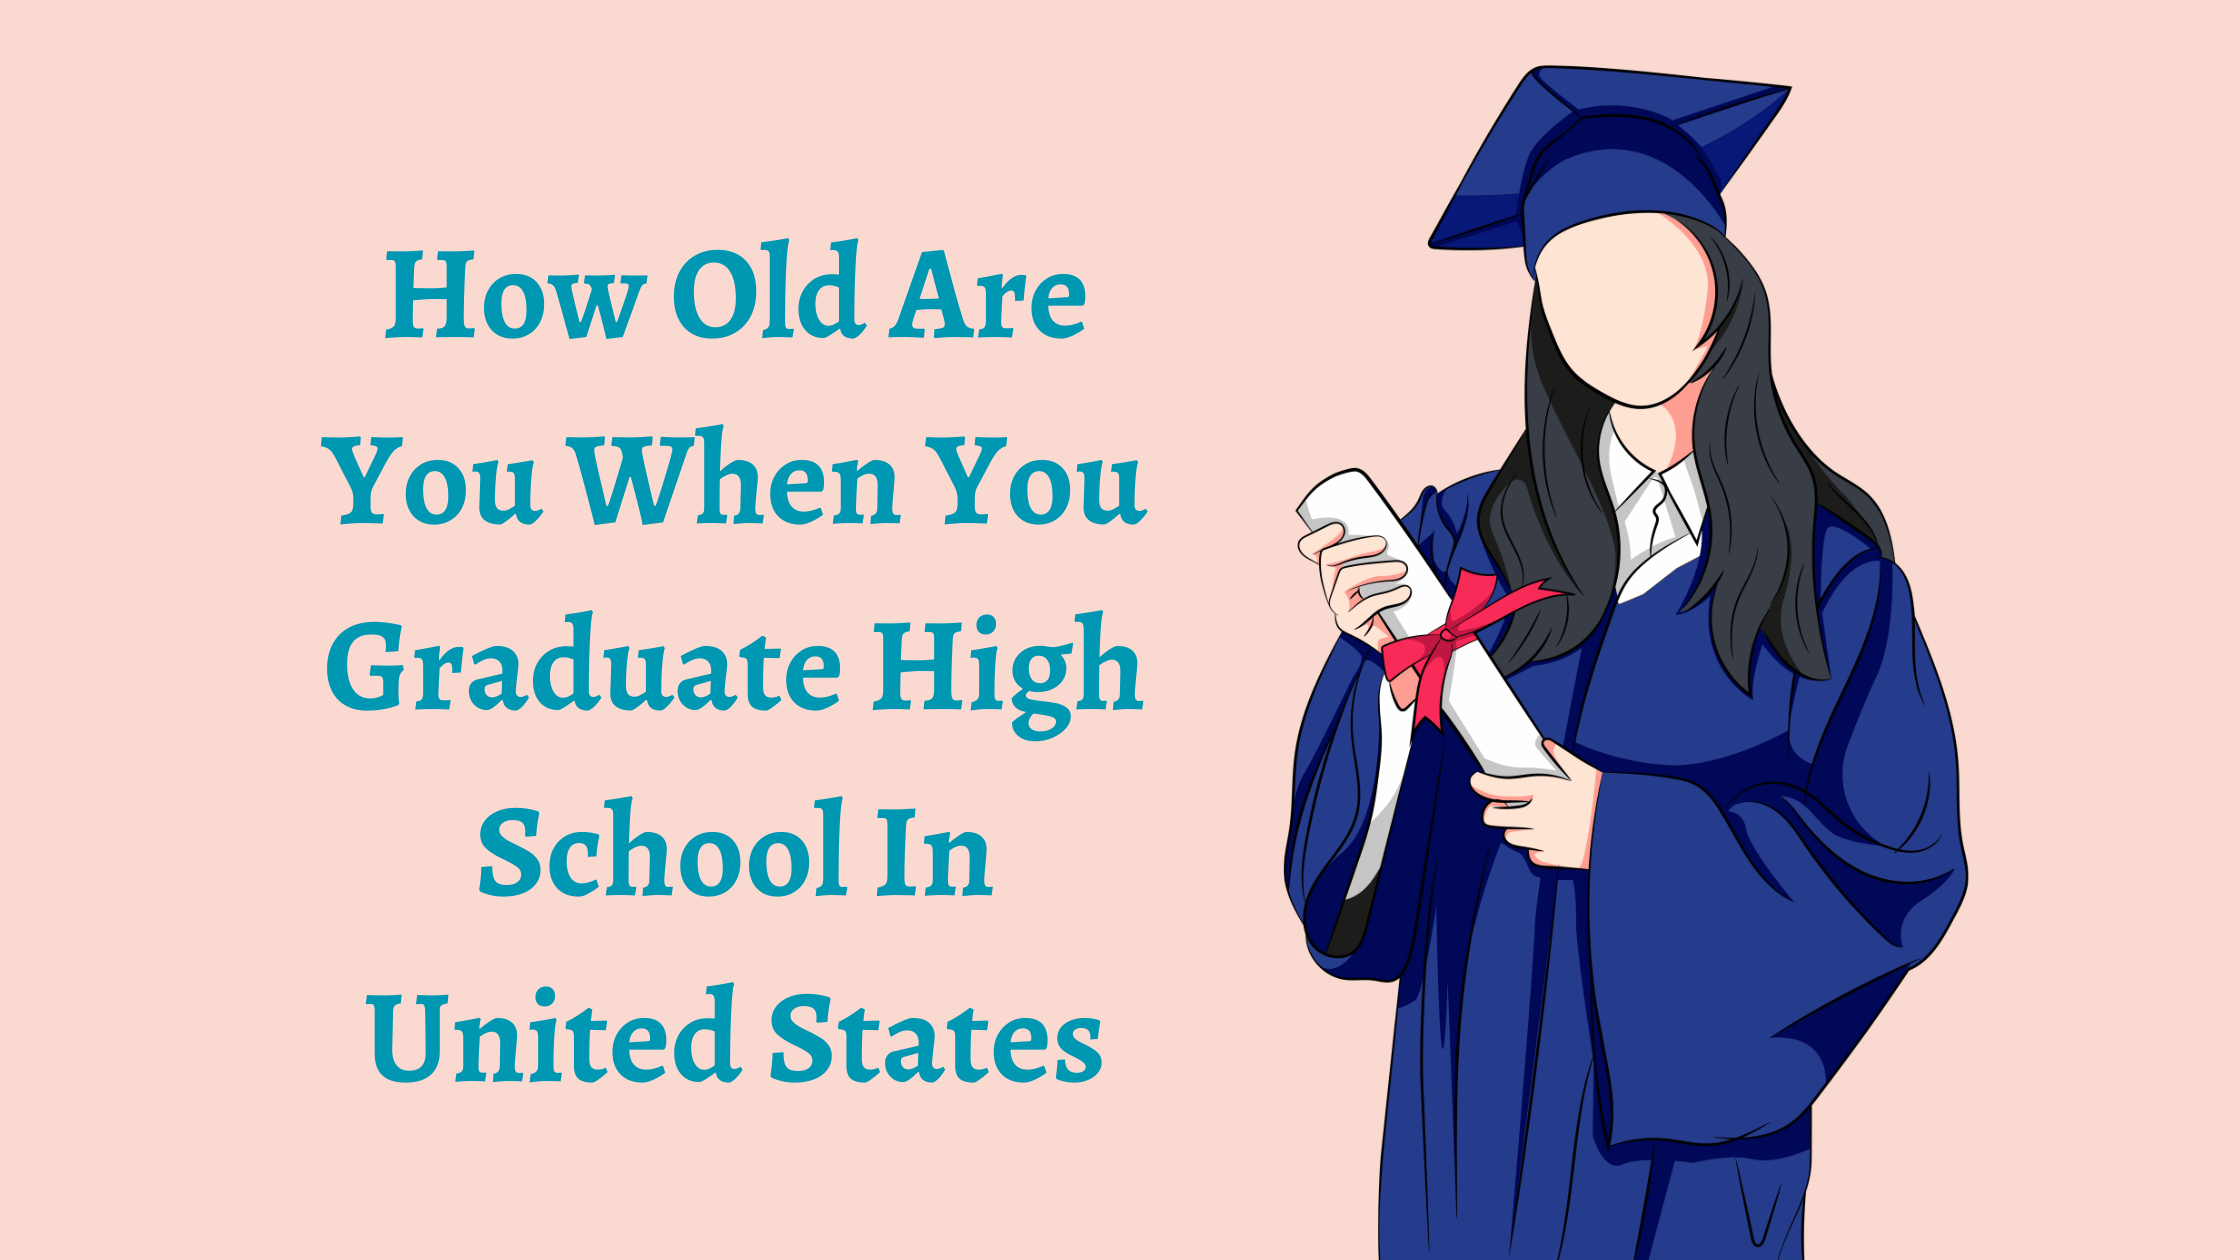 How Old Are You When You Graduate High School In United States